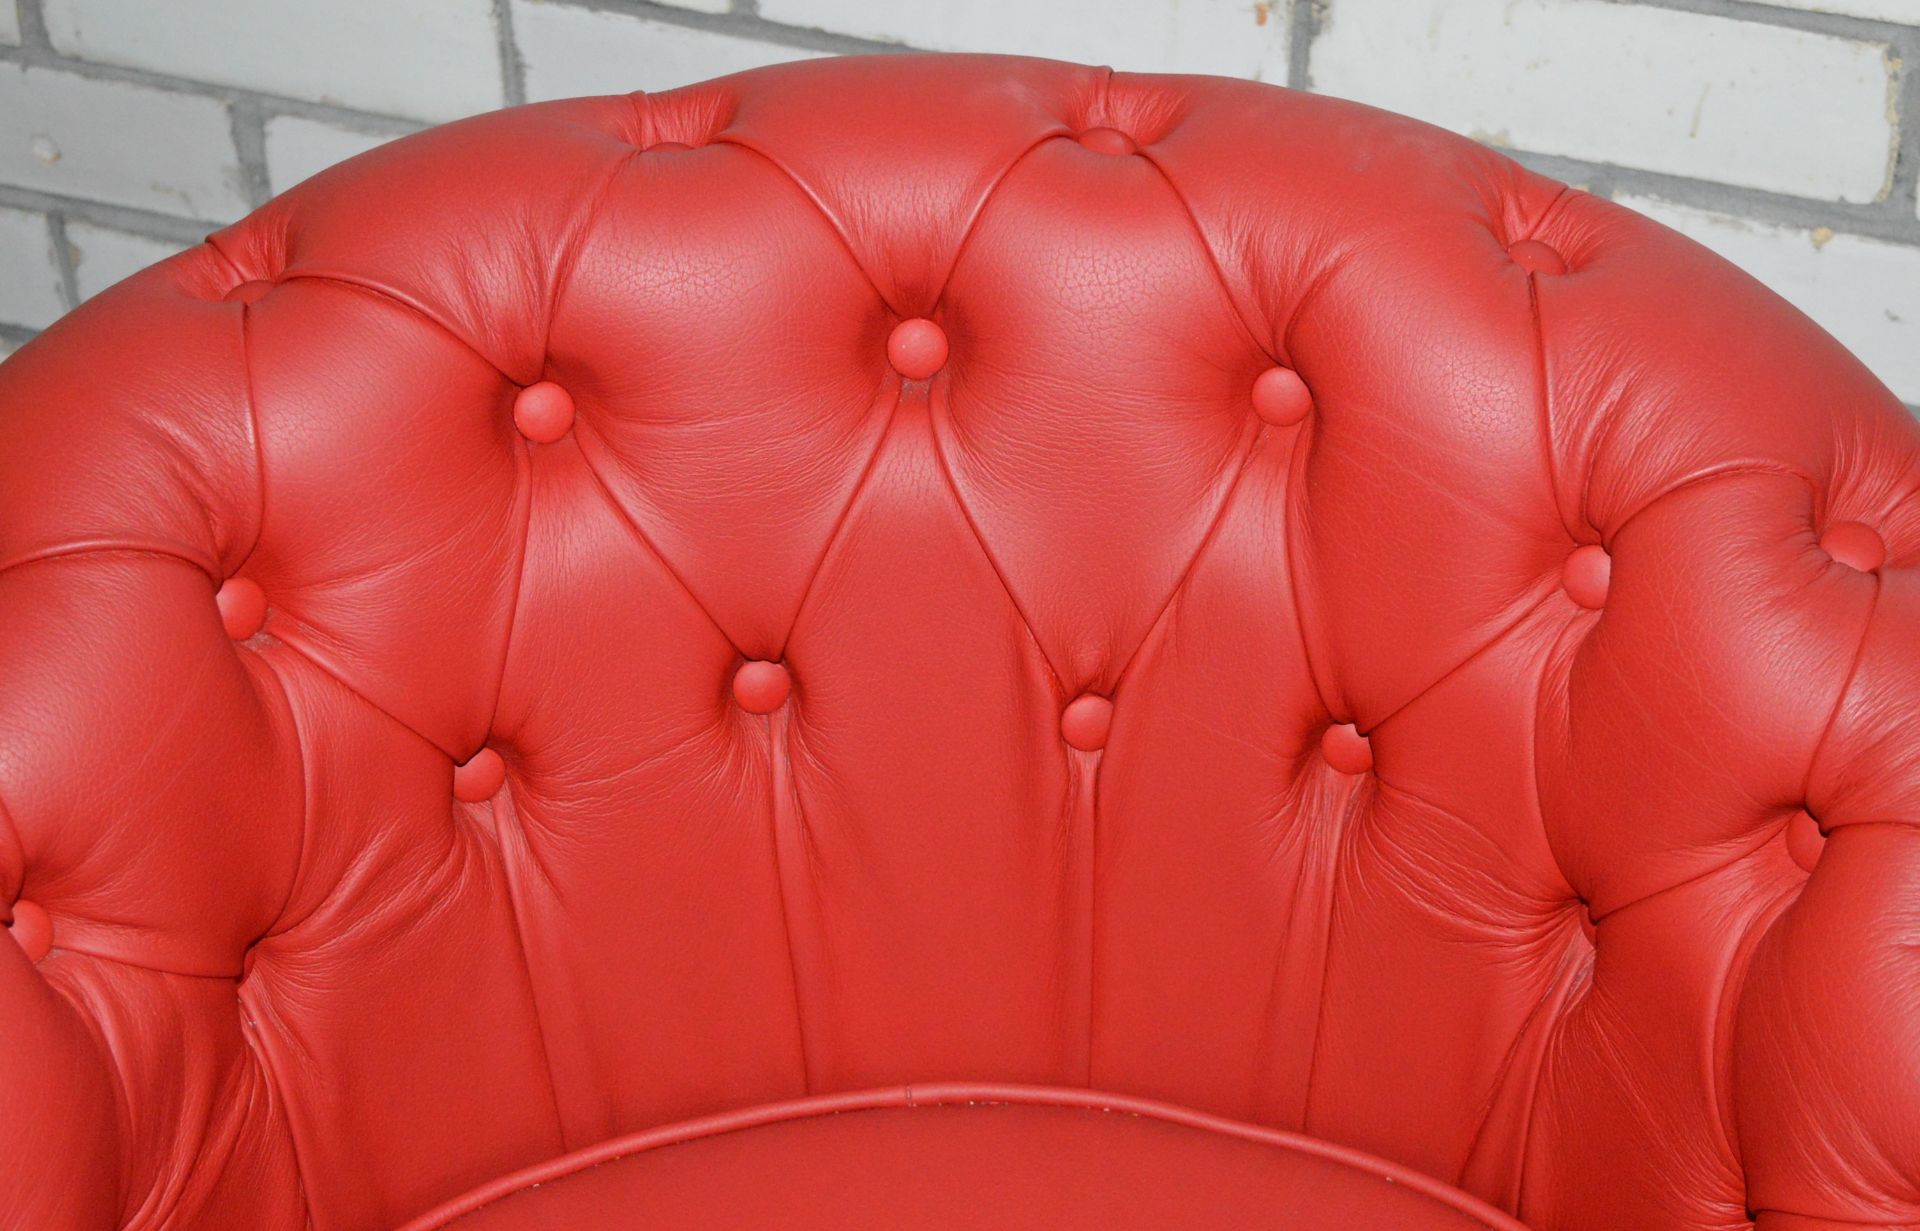 2 x Chesterfield Style Buttoned Back Red Leather Tub Chairs With Hardwood Legs Finished in an - Image 6 of 8